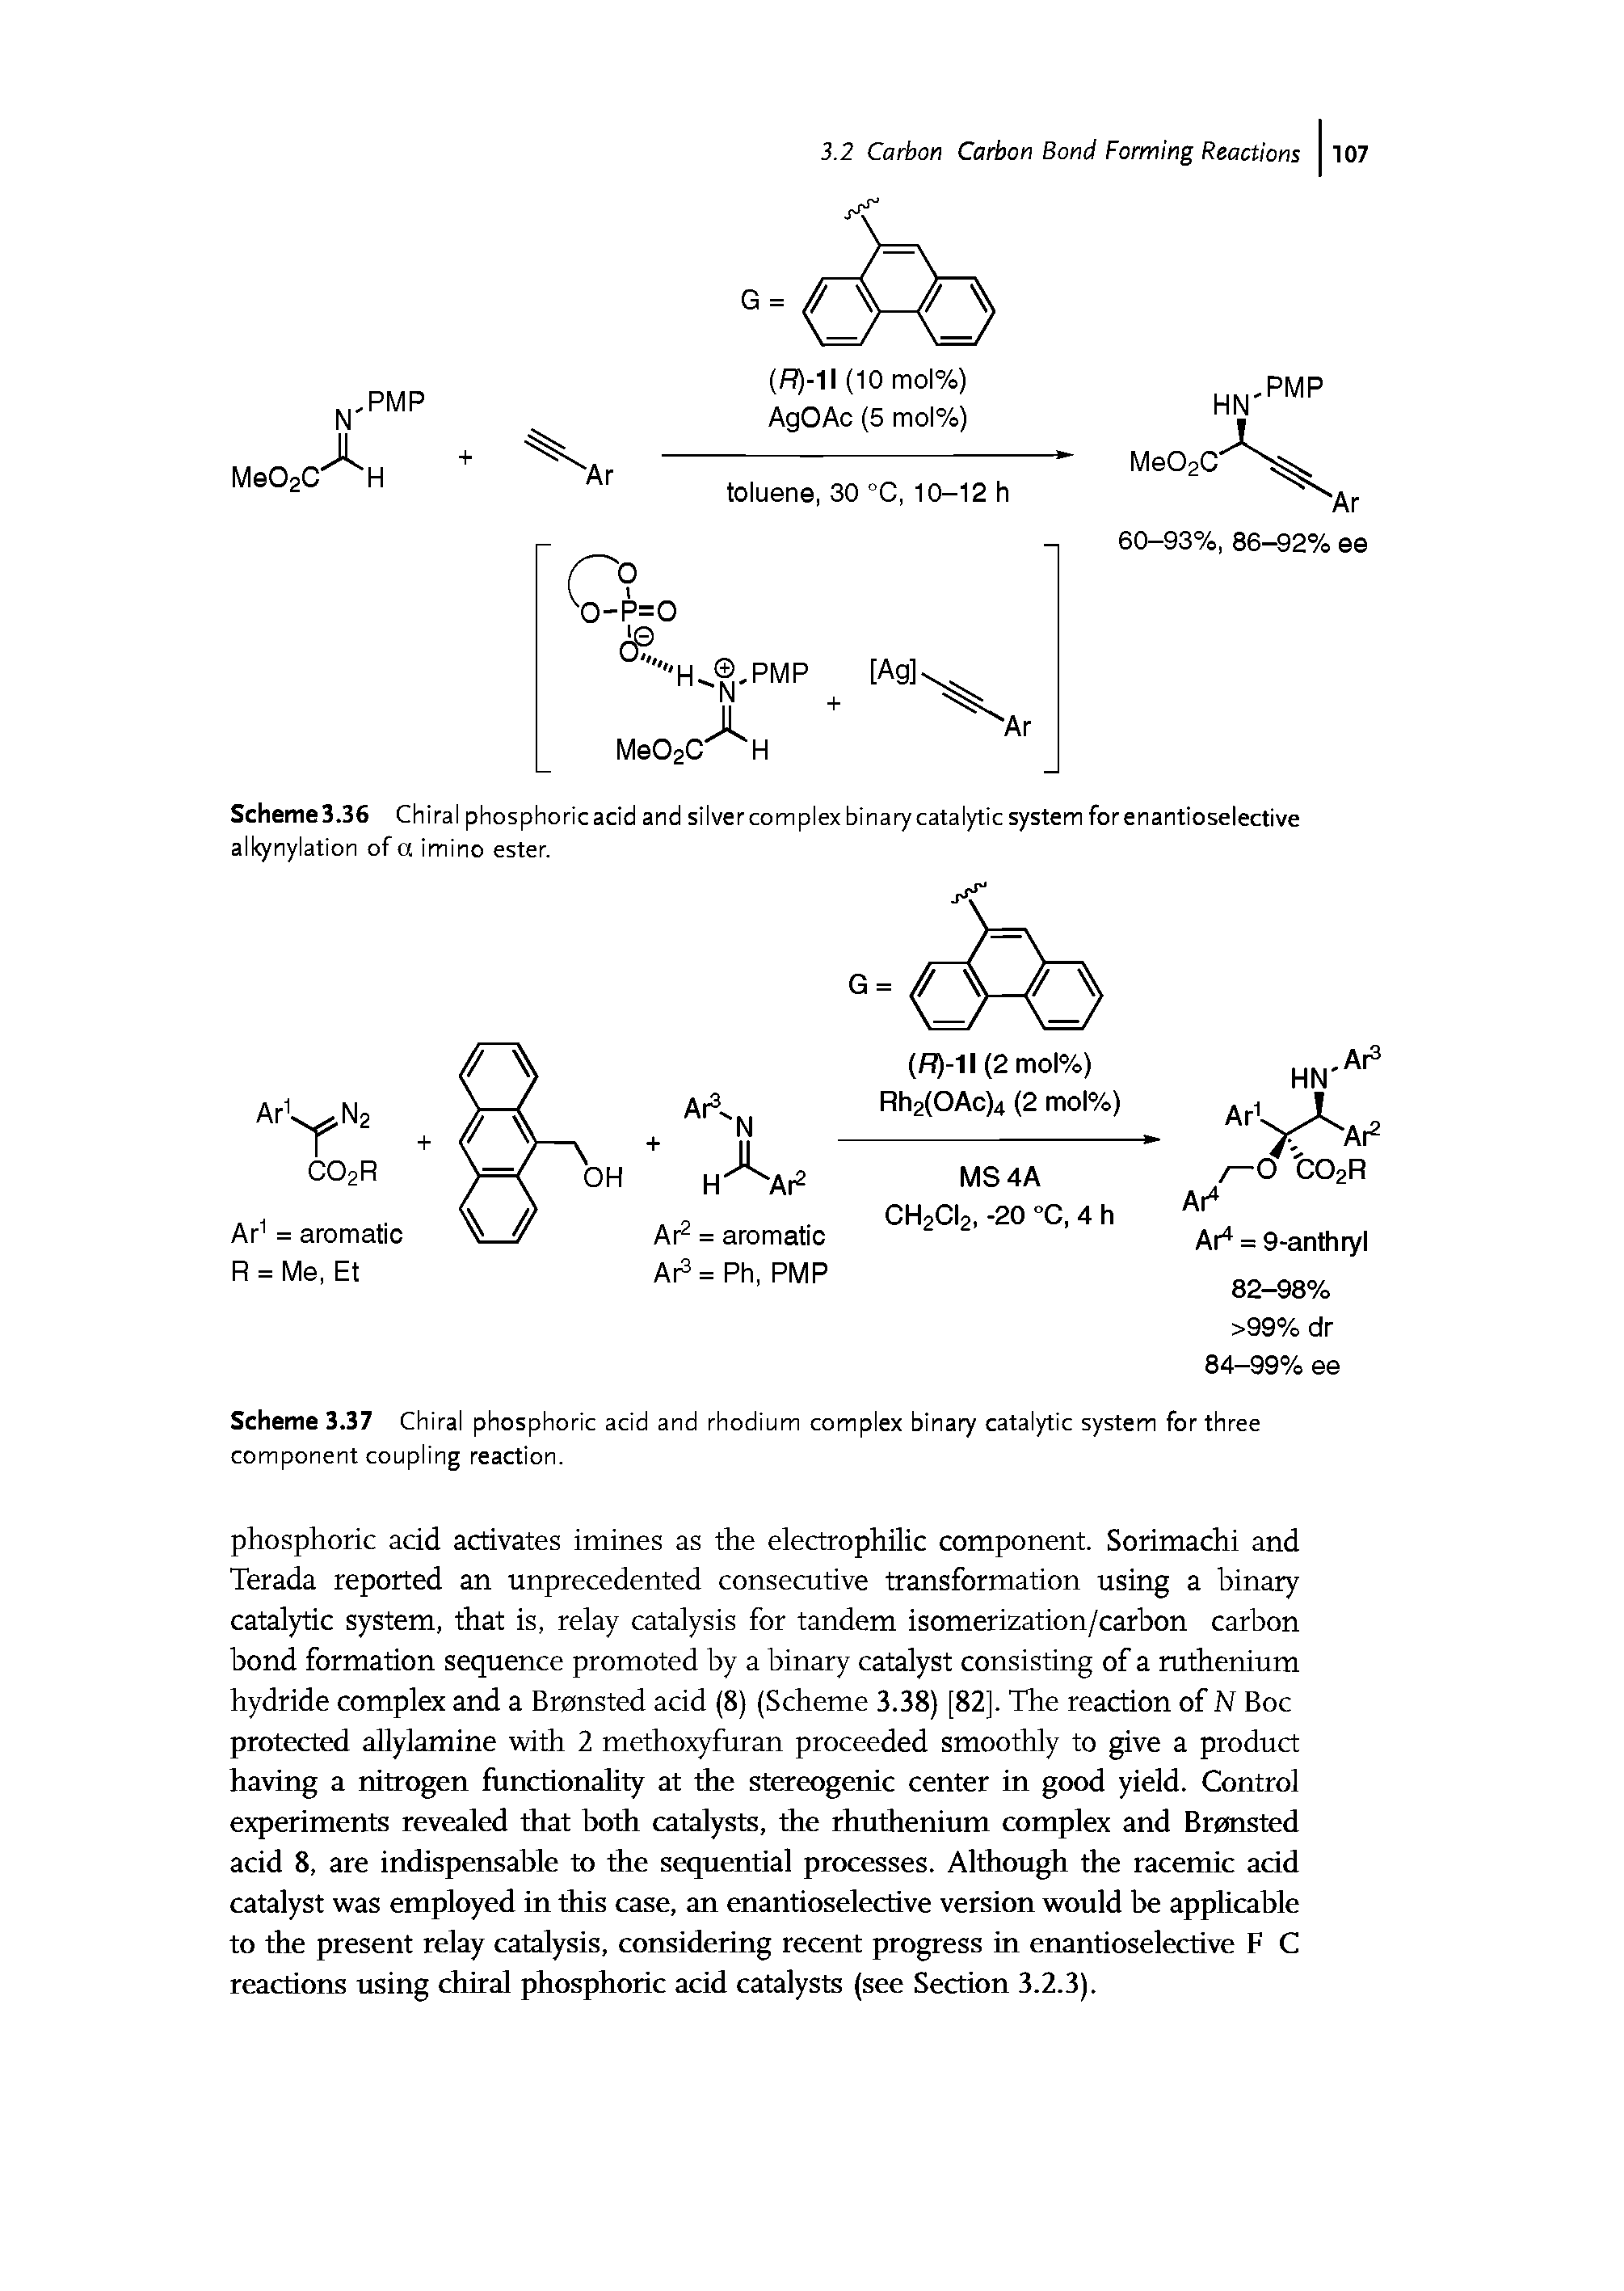 Scheme 3.37 Chiral phosphoric acid and rhodium complex binary catalytic system for three component coupling reaction.